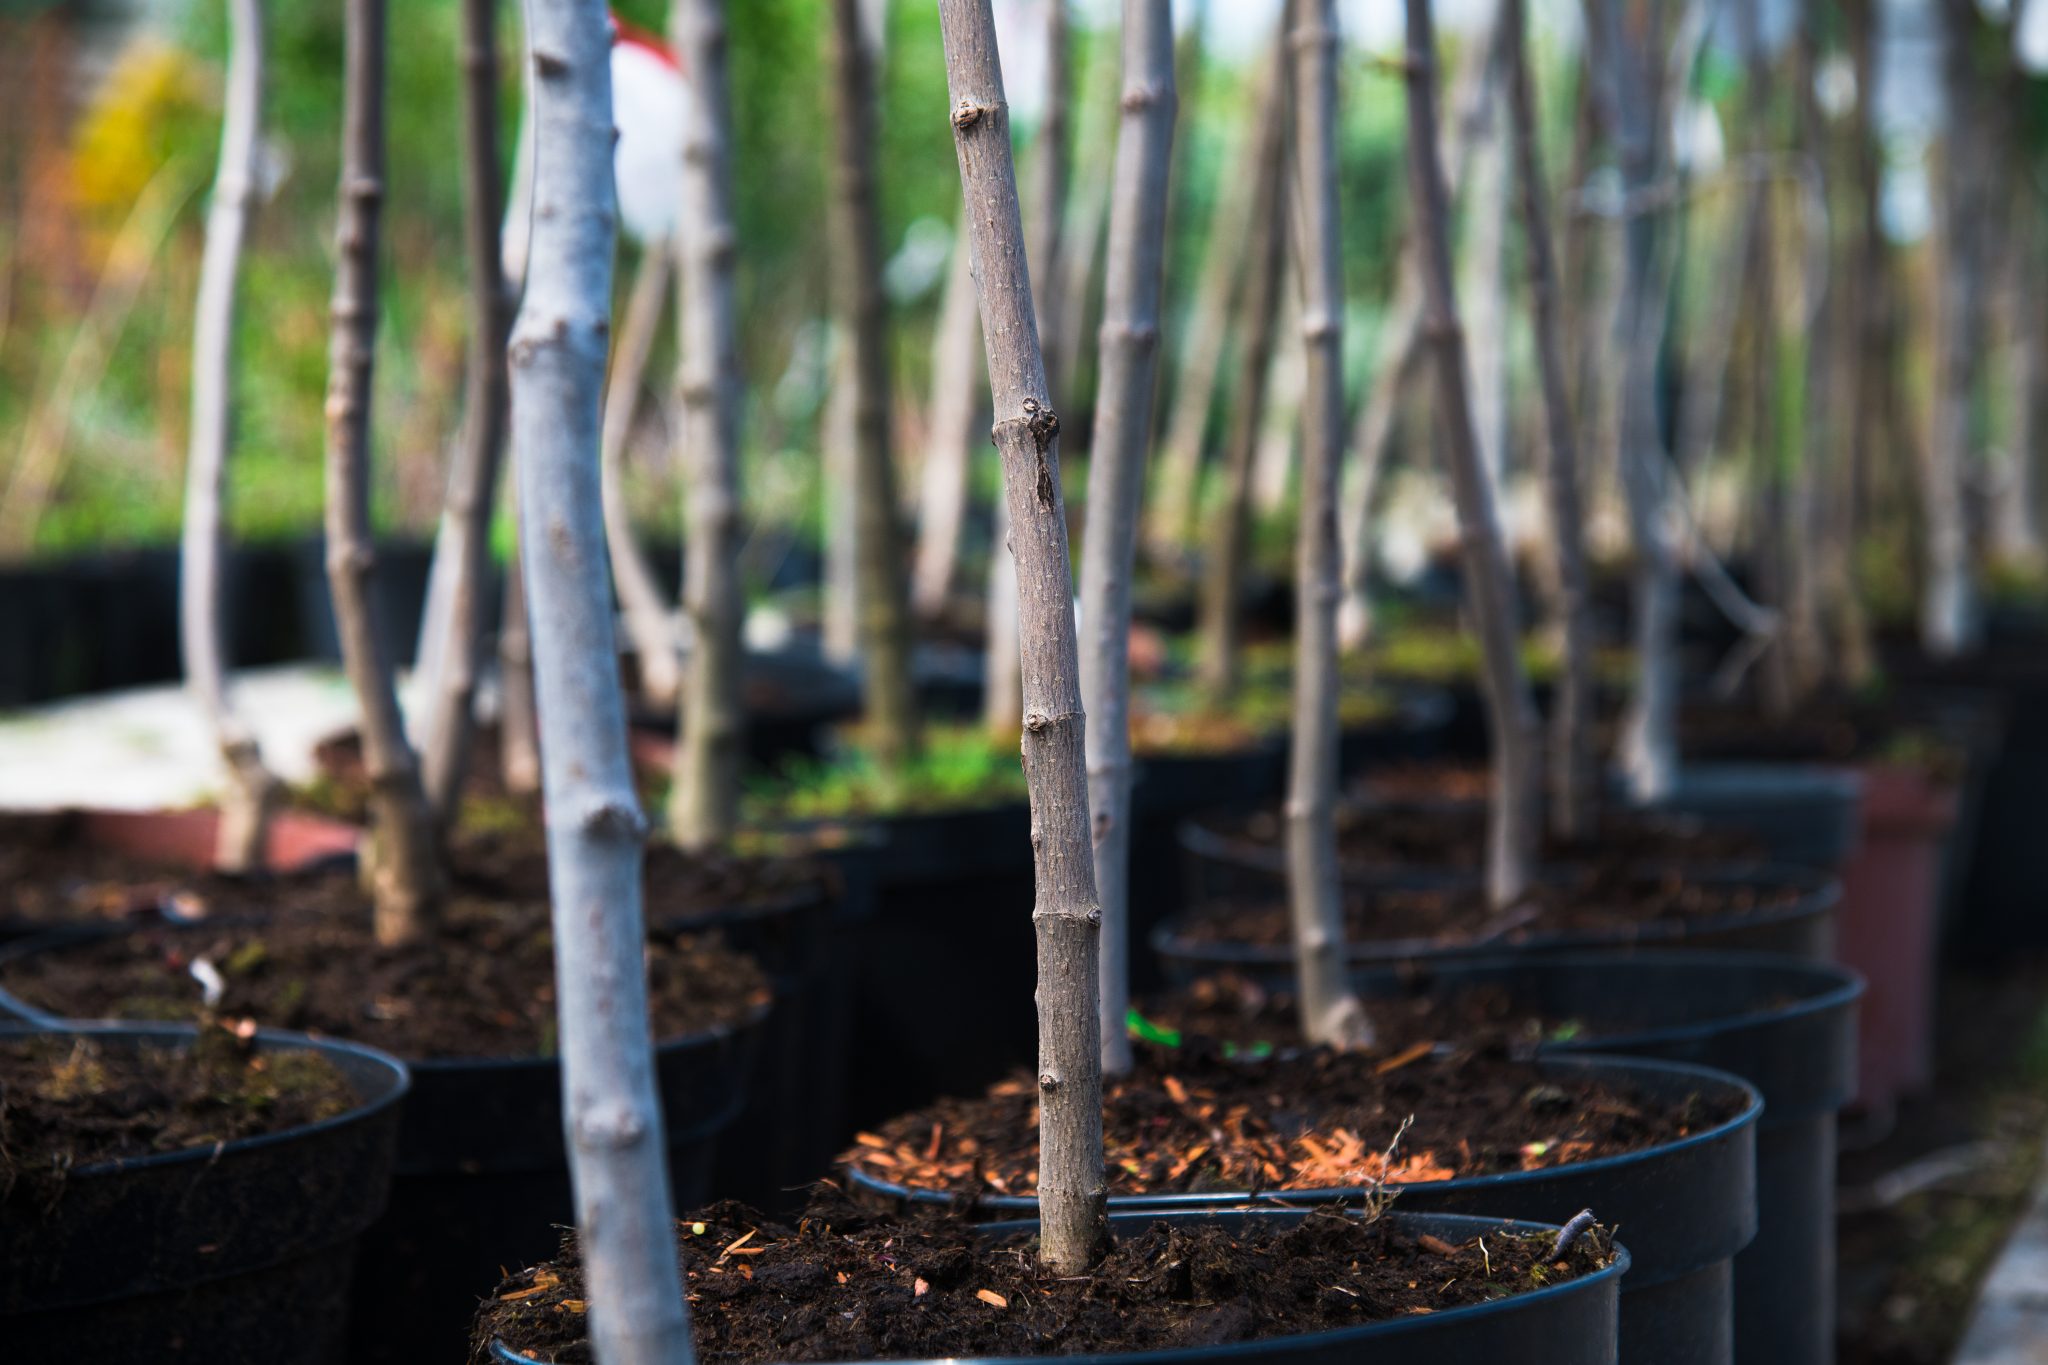 Rows of young maple trees in plastic pots on plant nursery